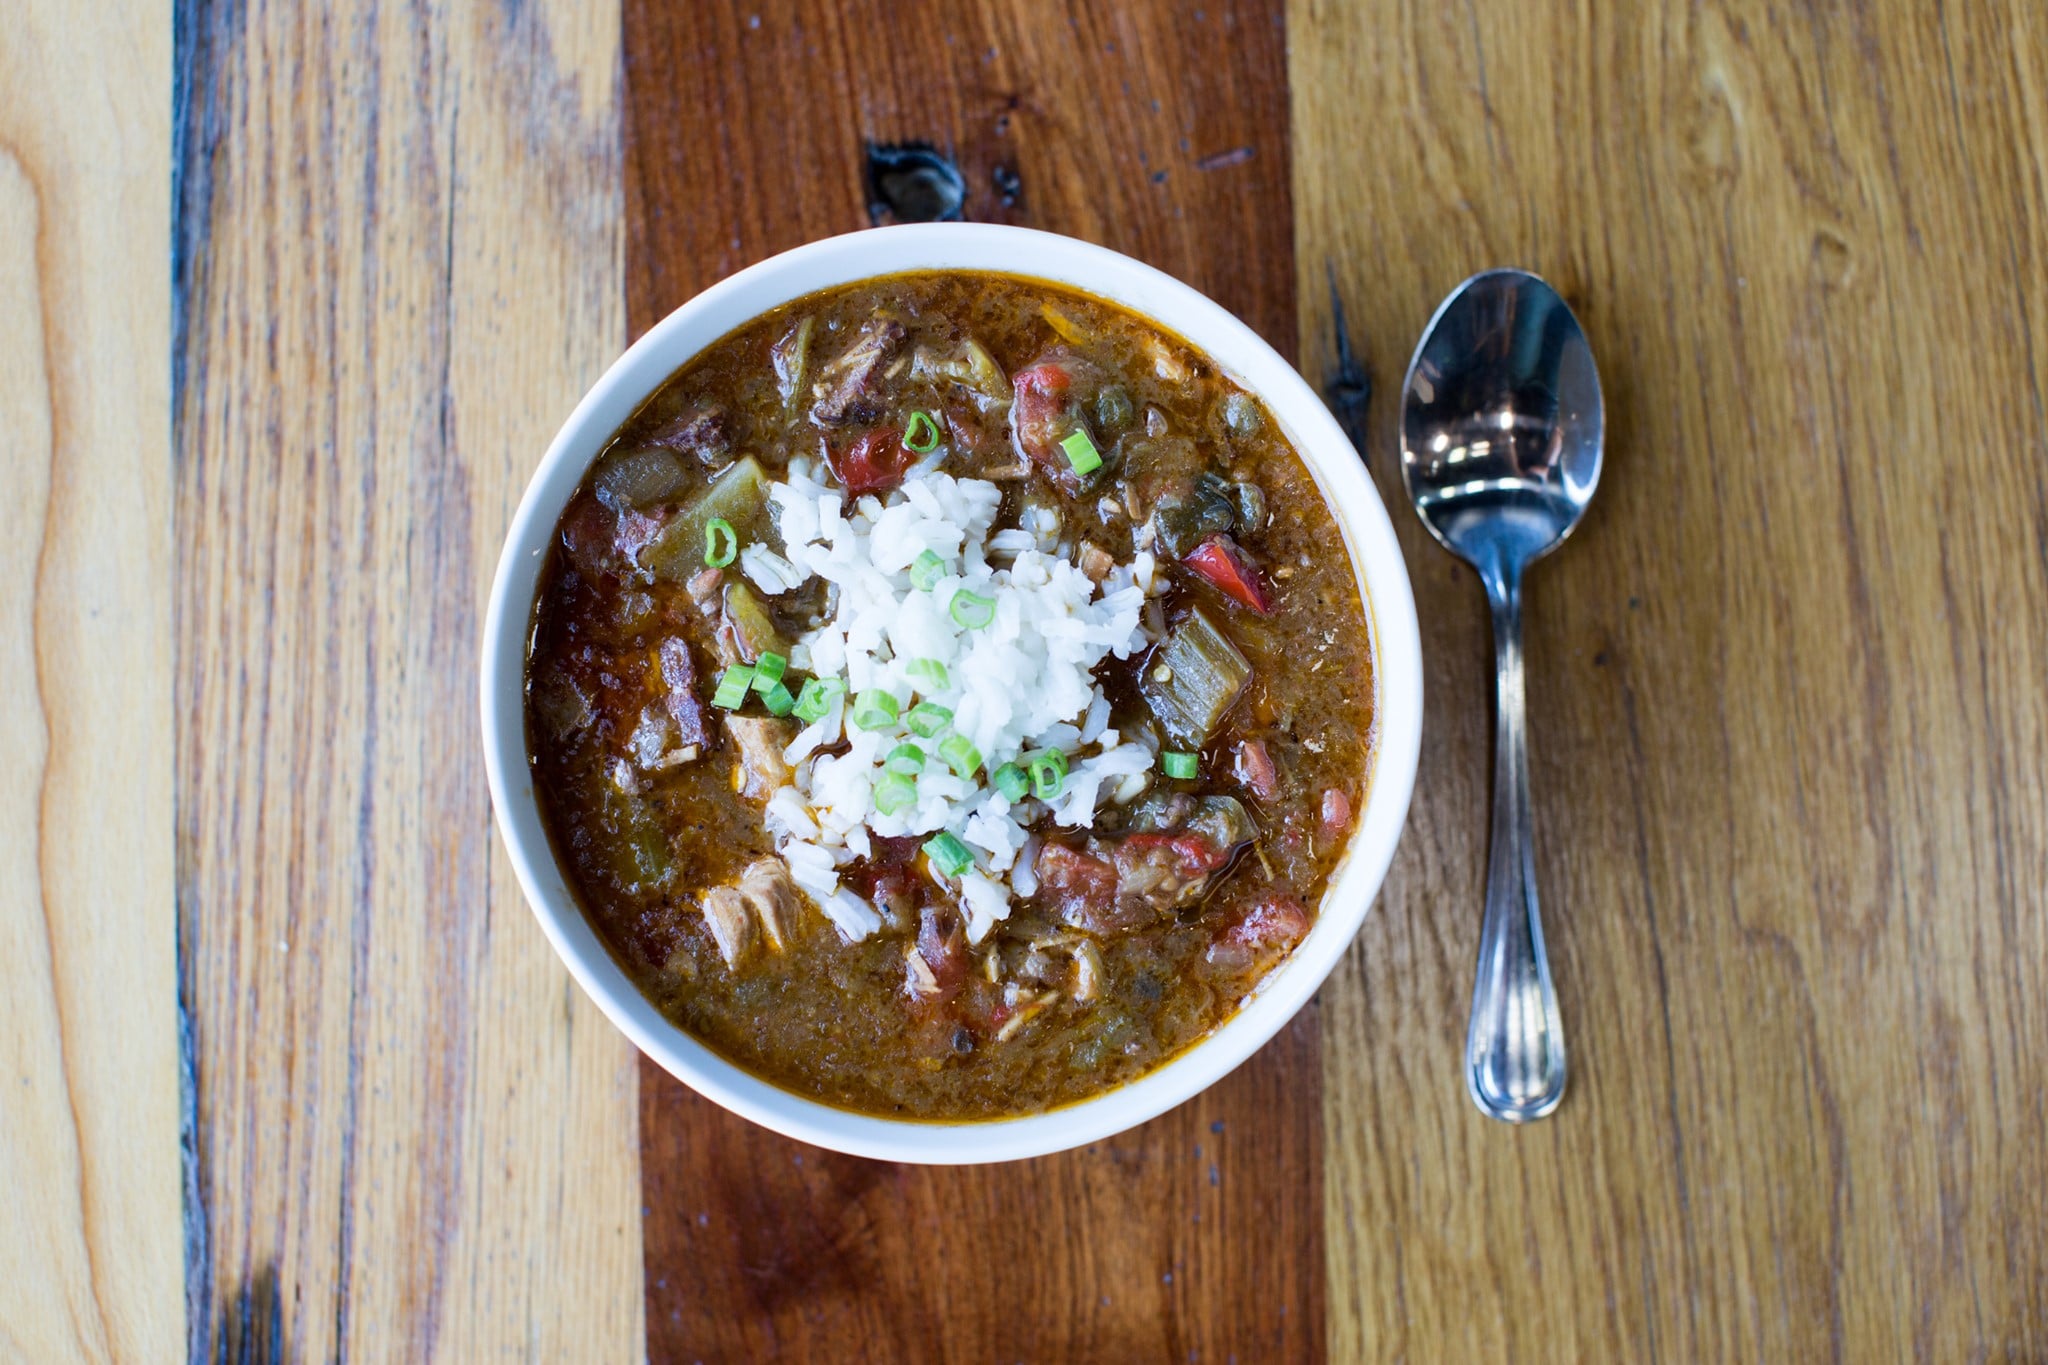 gumbo homewood gourmet 5 spots to grab a warm bowl of gumbo for National Gumbo Day, Oct. 13